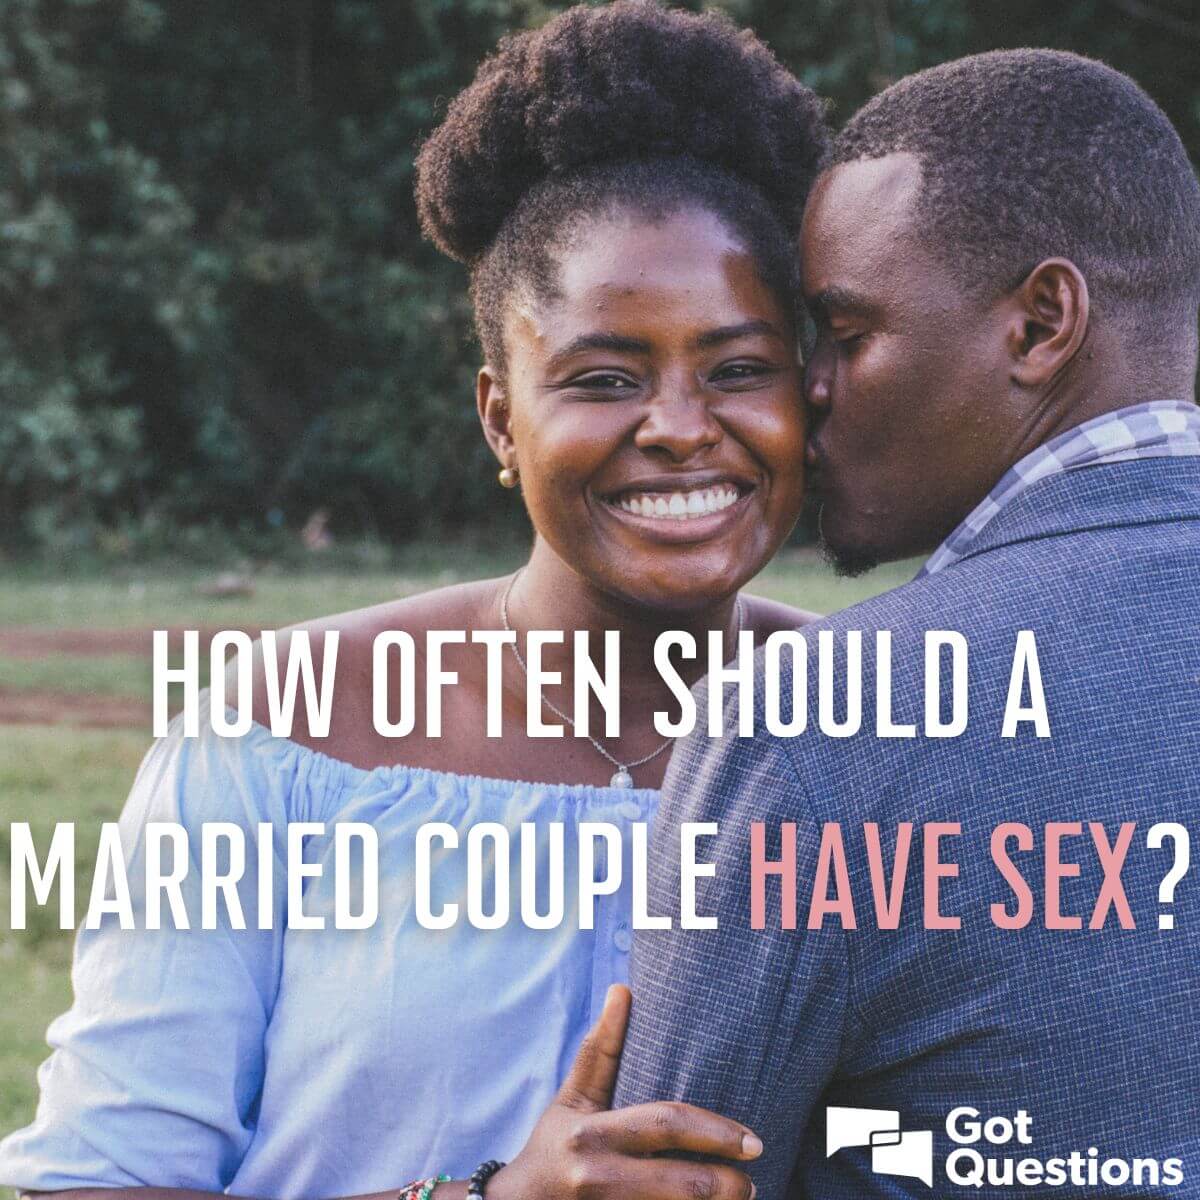 How often should a married couple have sex? GotQuestions